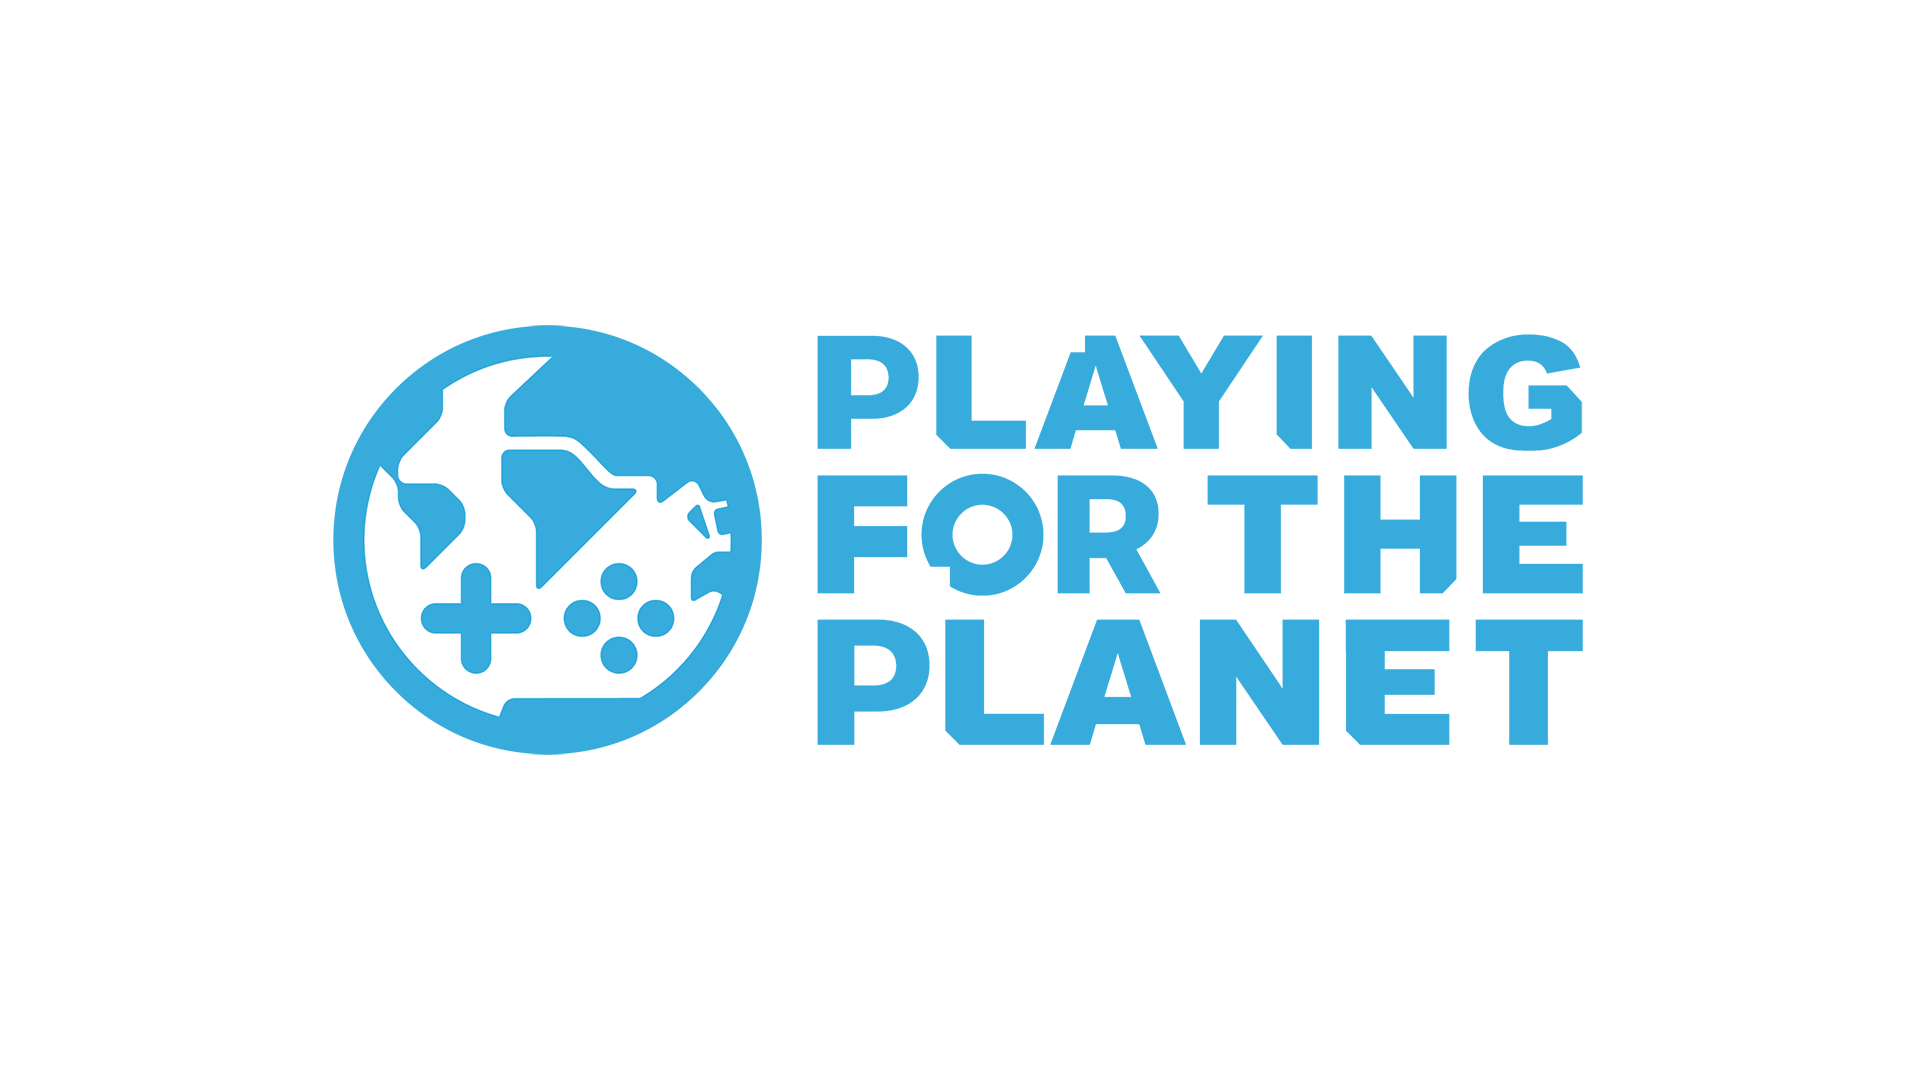 PlayStation Playing for the Planet